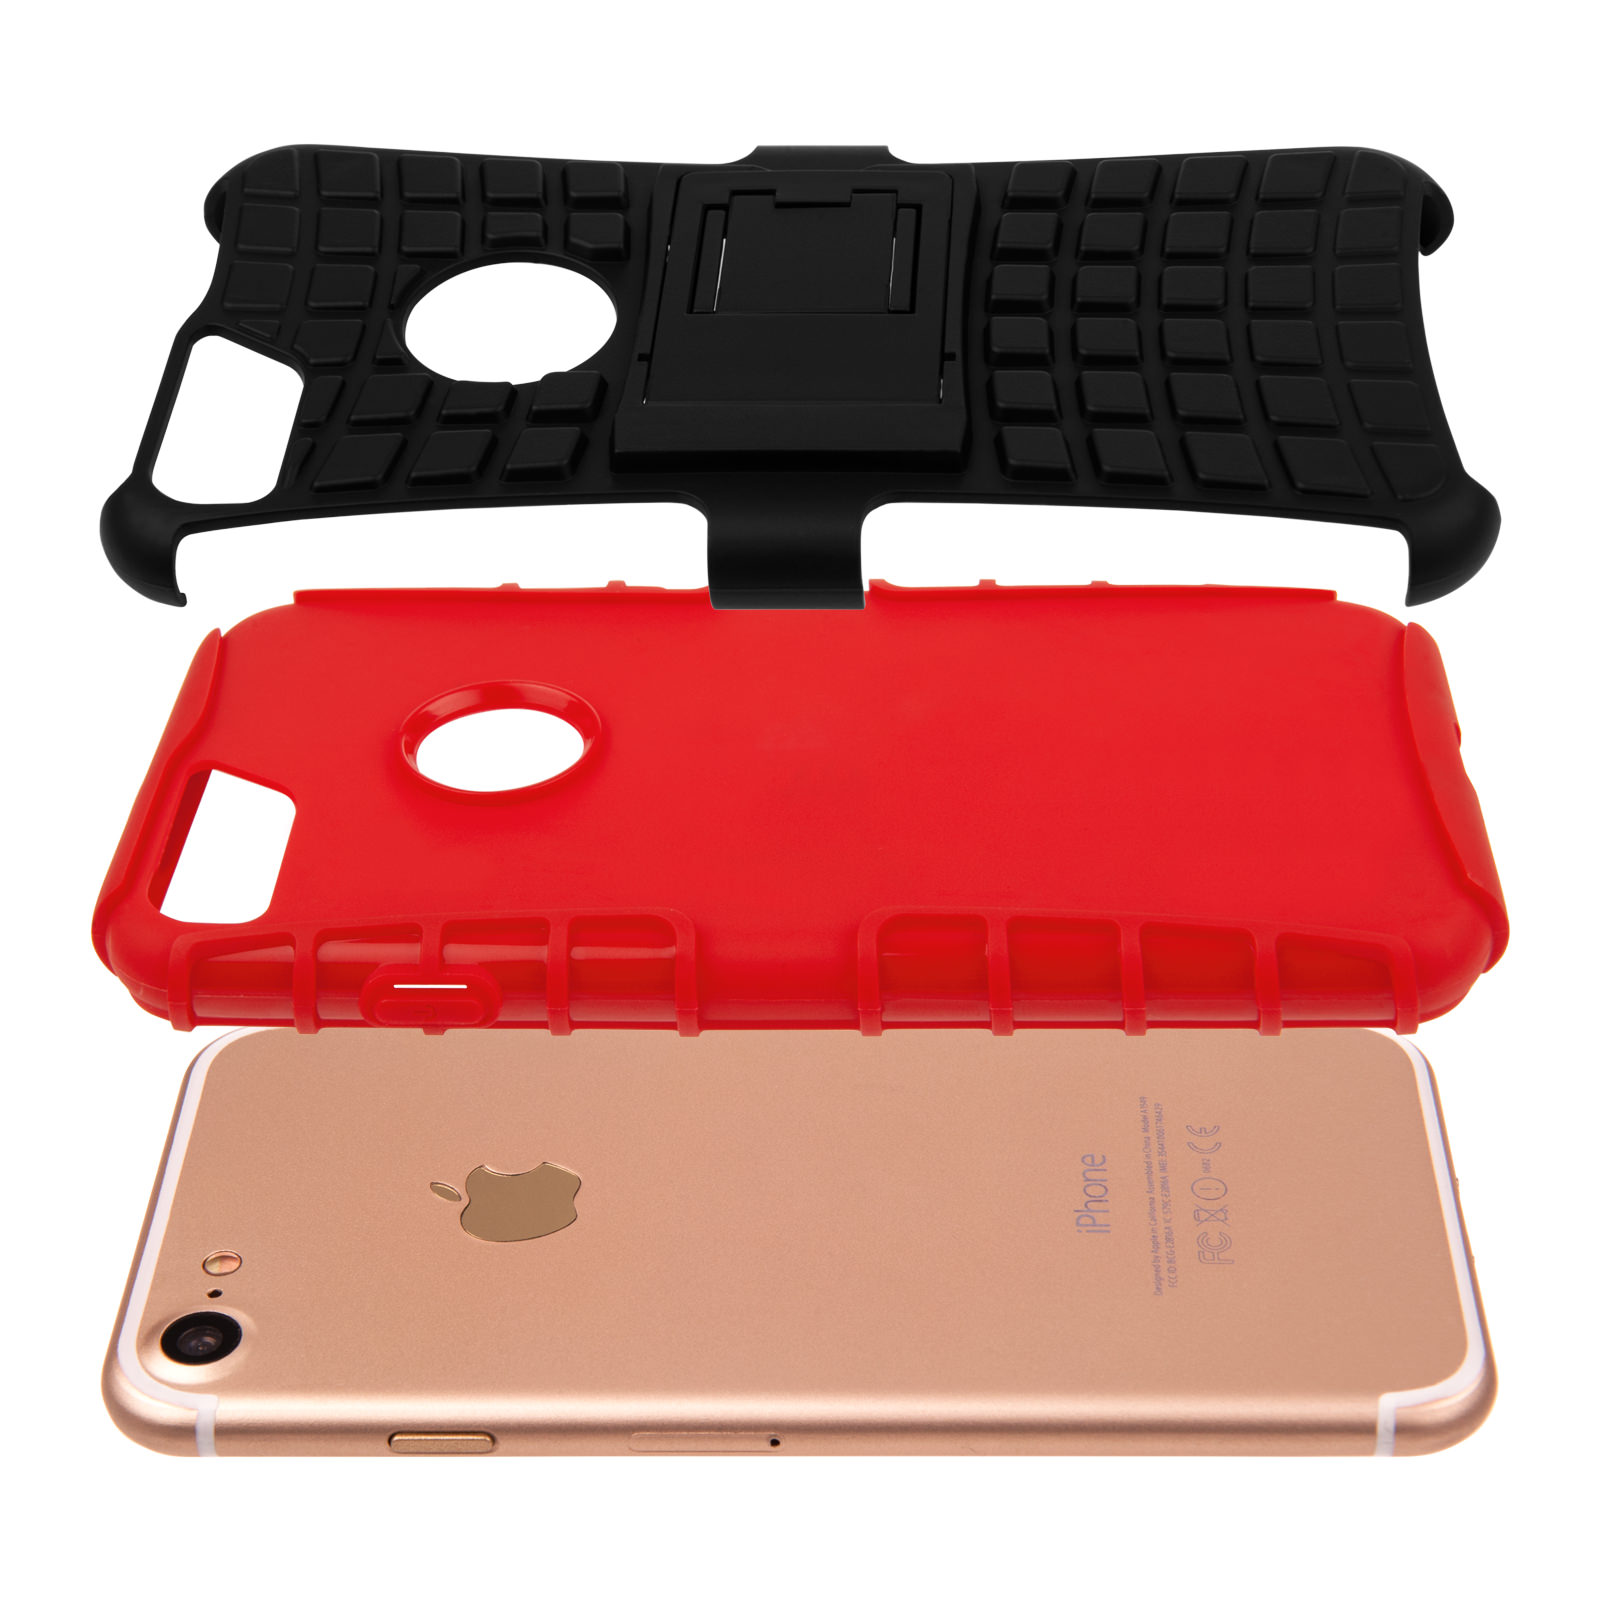 YouSave iPhone 7 Kickstand Combo Case - Red